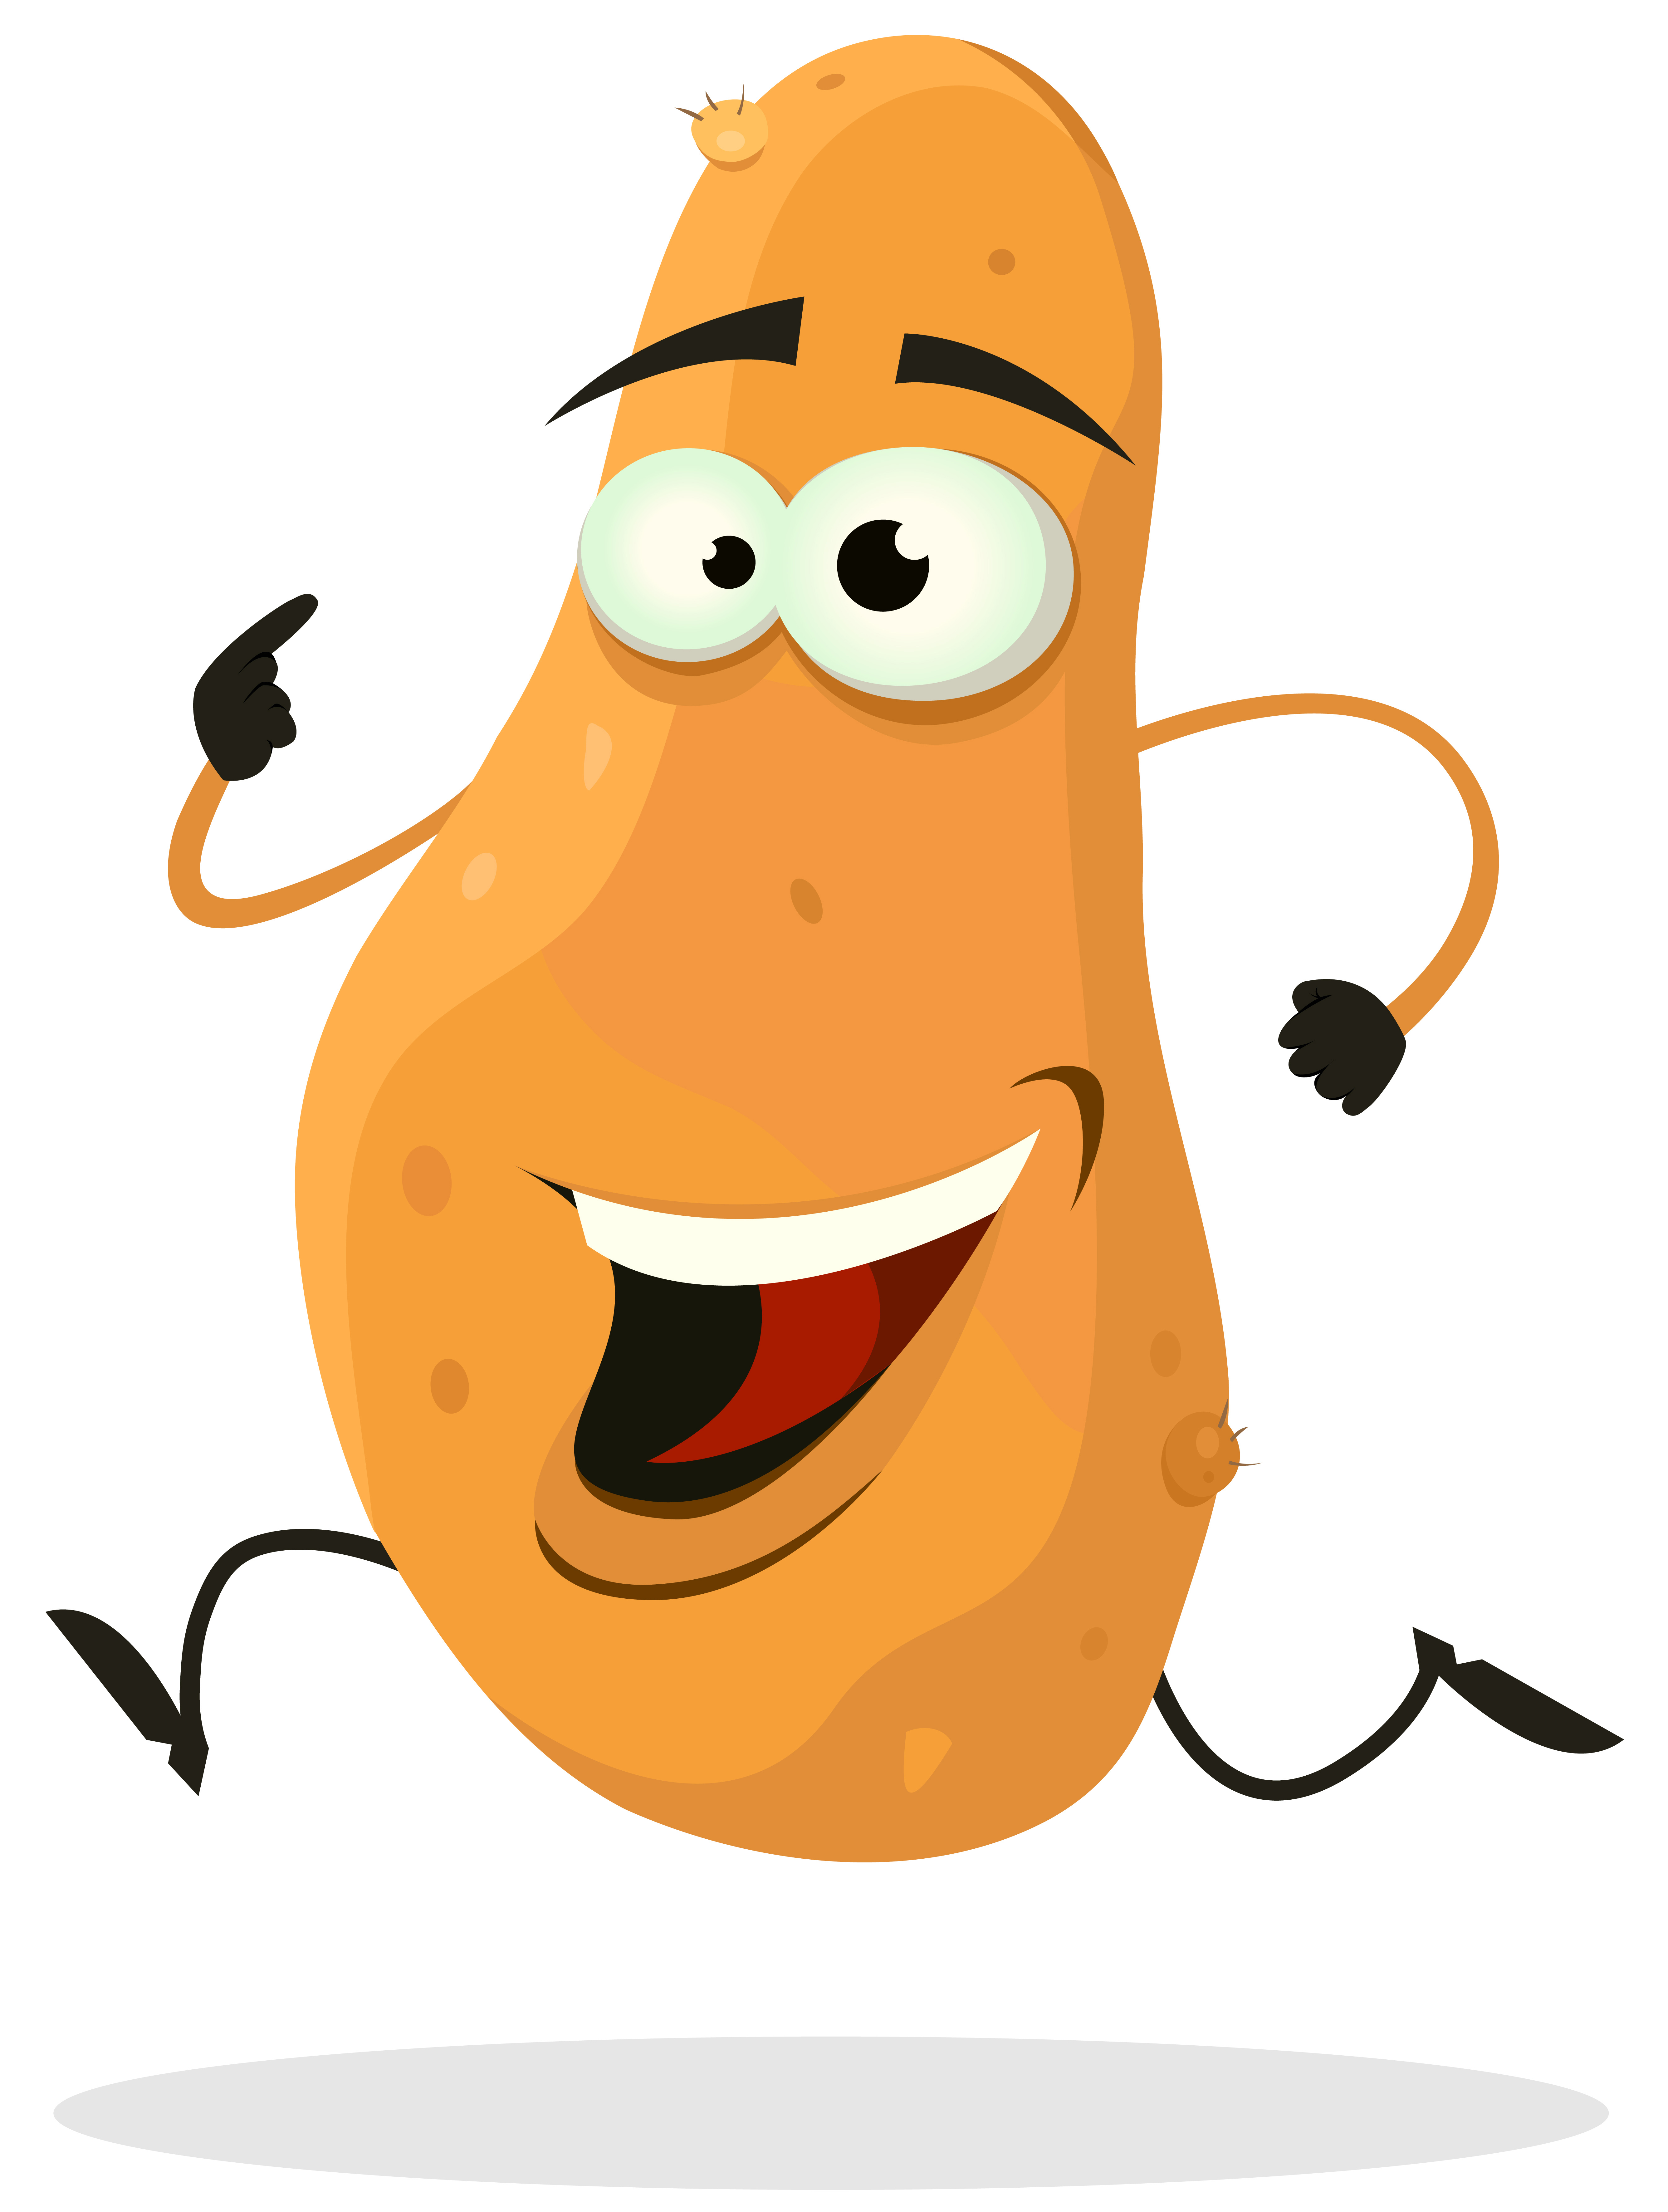 Illustration of a funny happy and healthy cartoon potato vegetable characte...